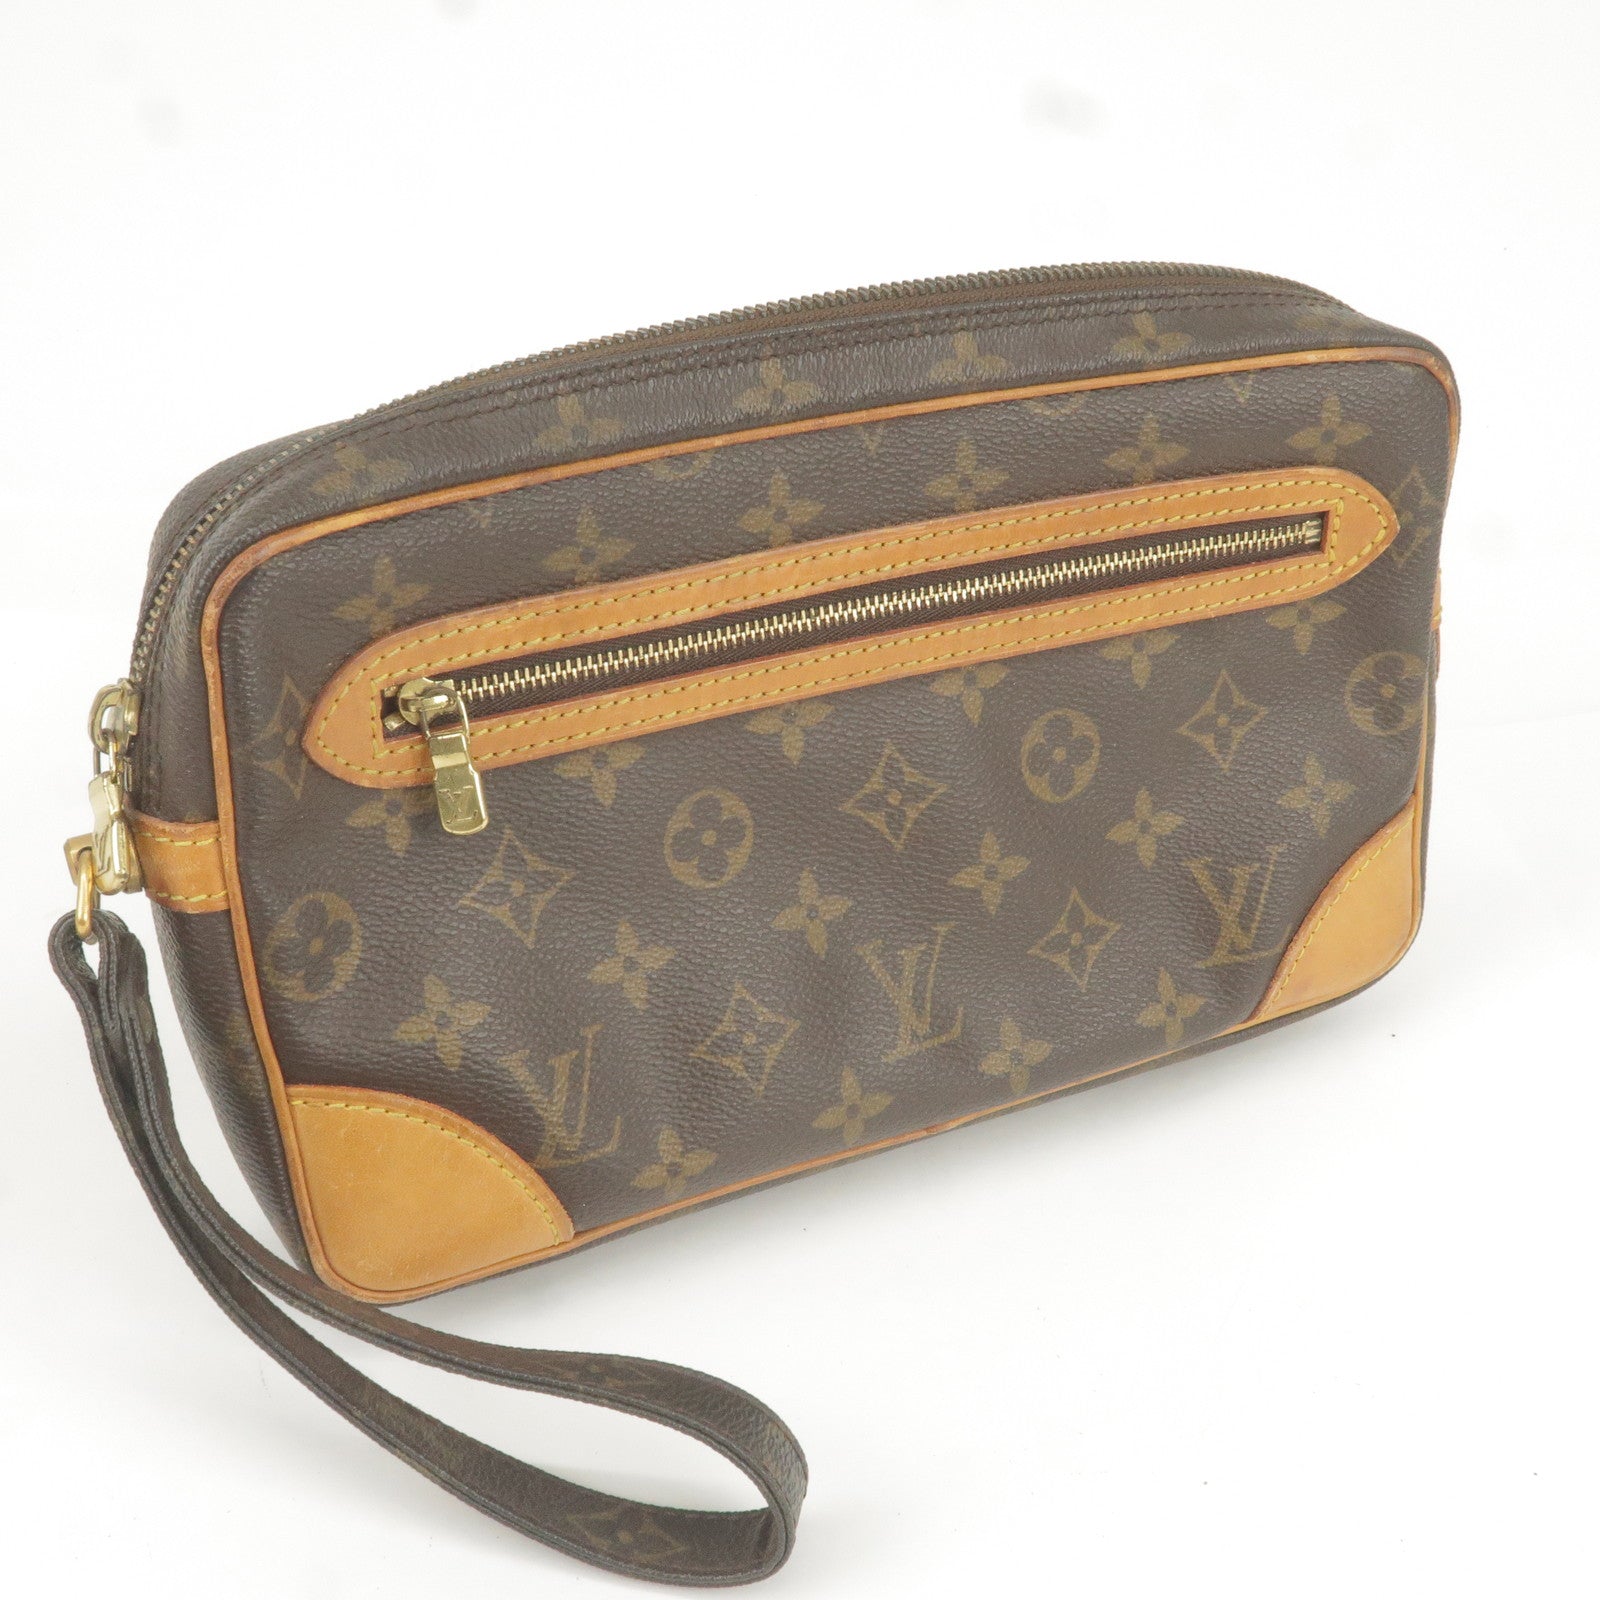 Louis Vuitton Marly handbag clutch in monogram canvas and natural